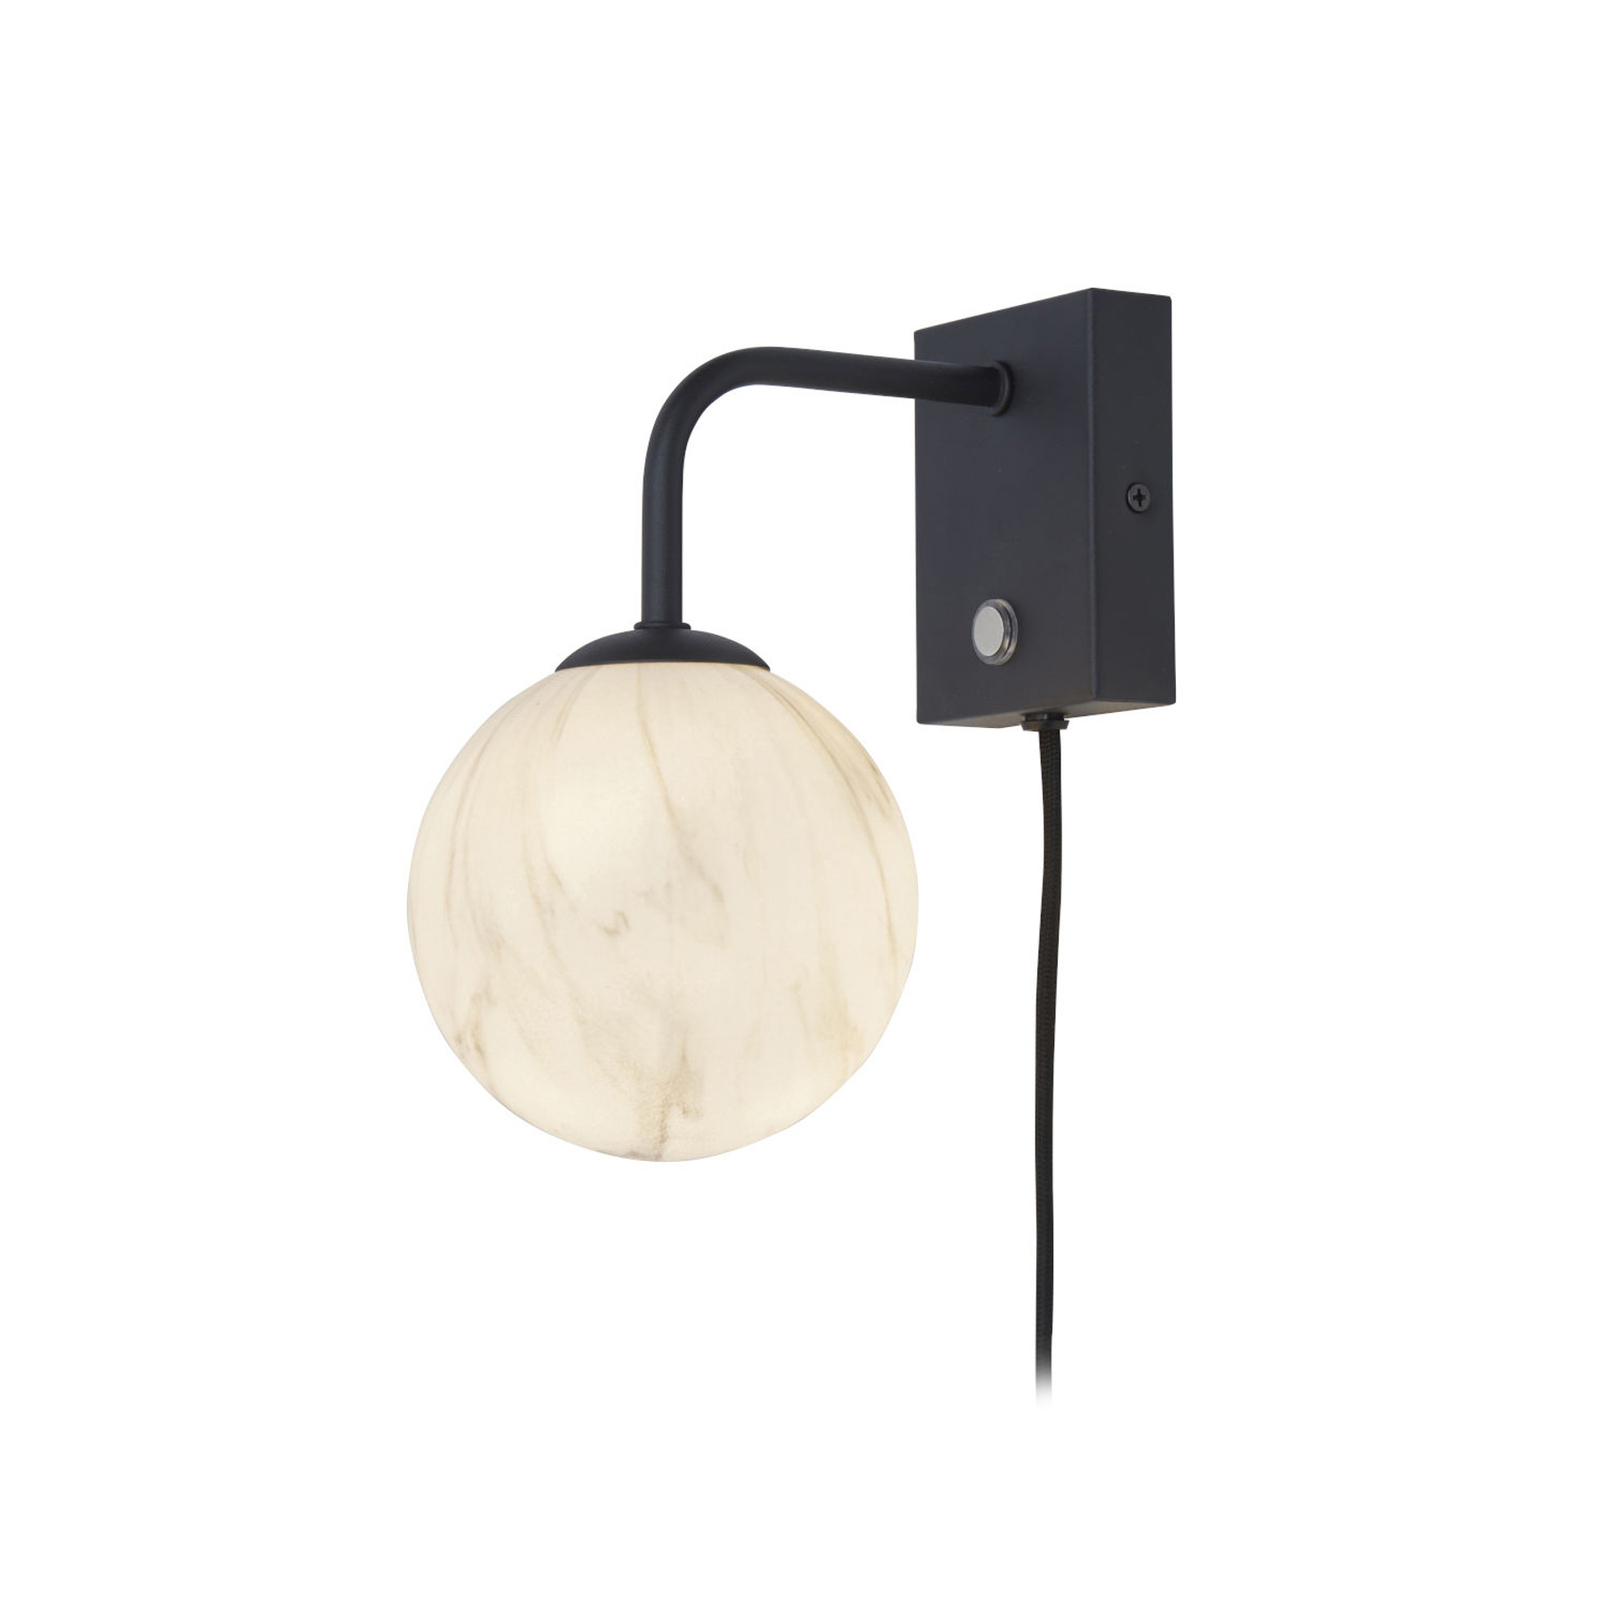 It’s about RoMi Carrara wall lamp, black/marble